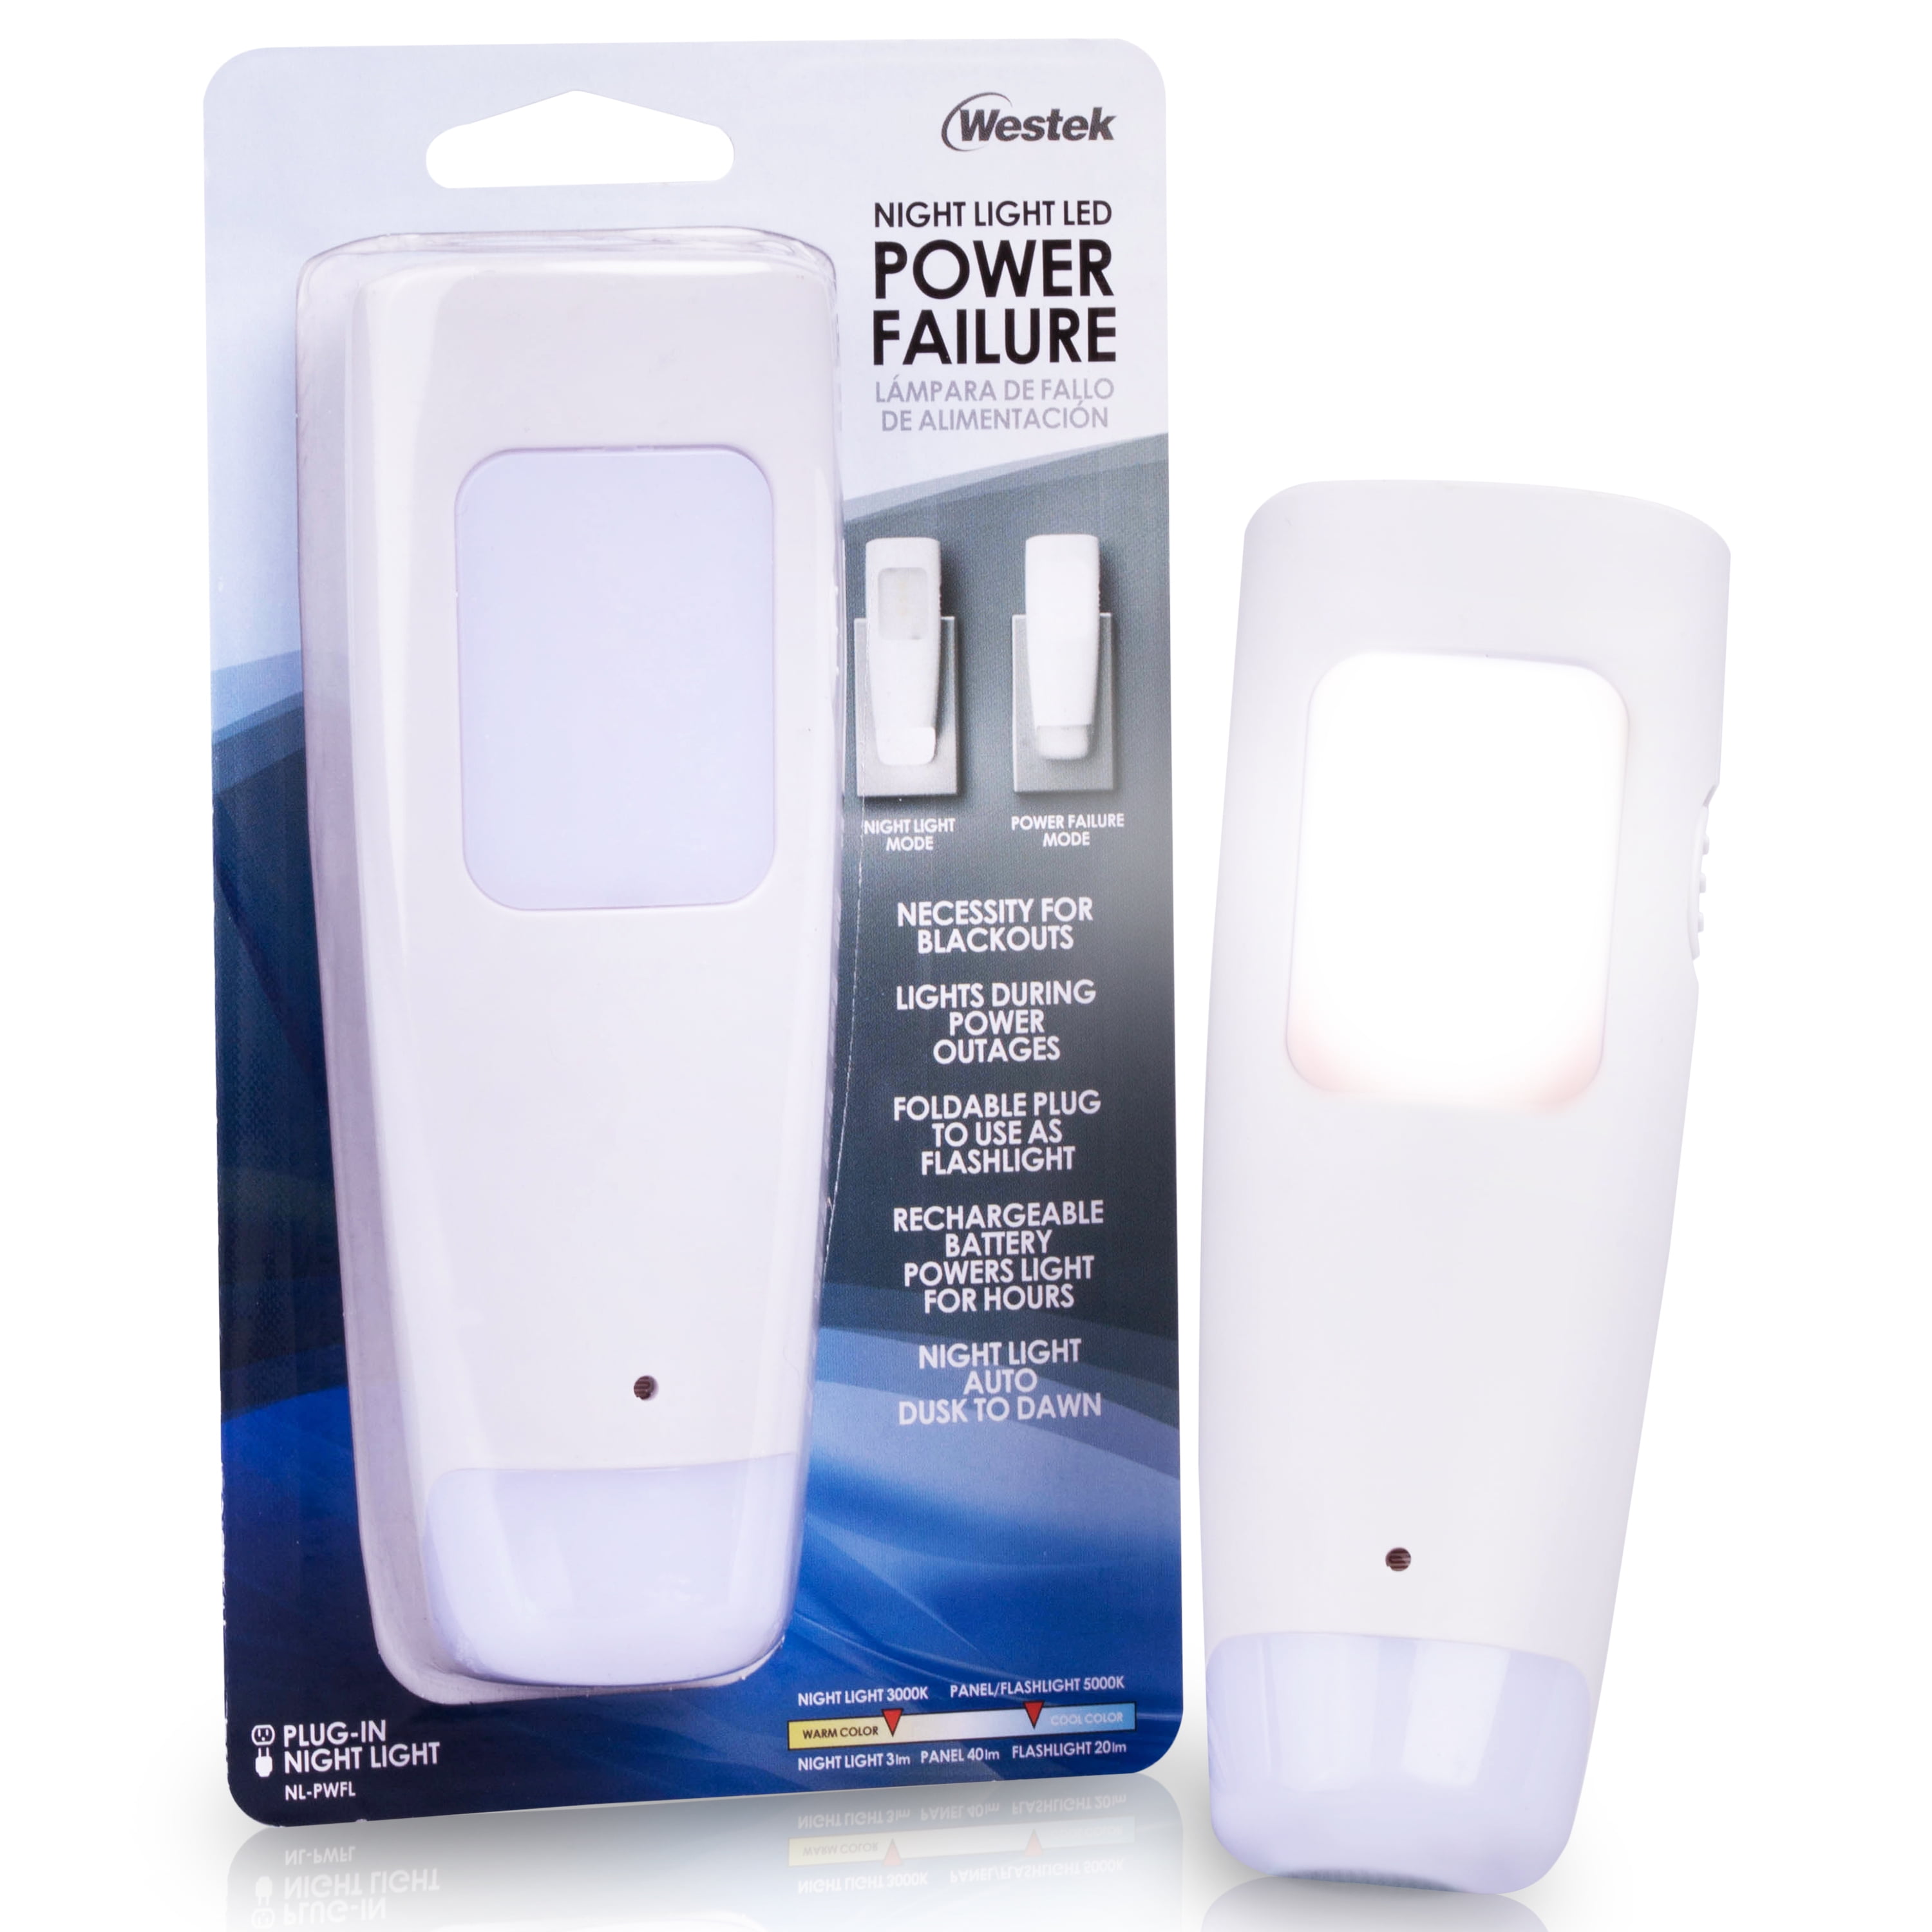 GE Jasco 11281-T1 3 In 1 Soft White Rechargeable Power Failure LED Night Light